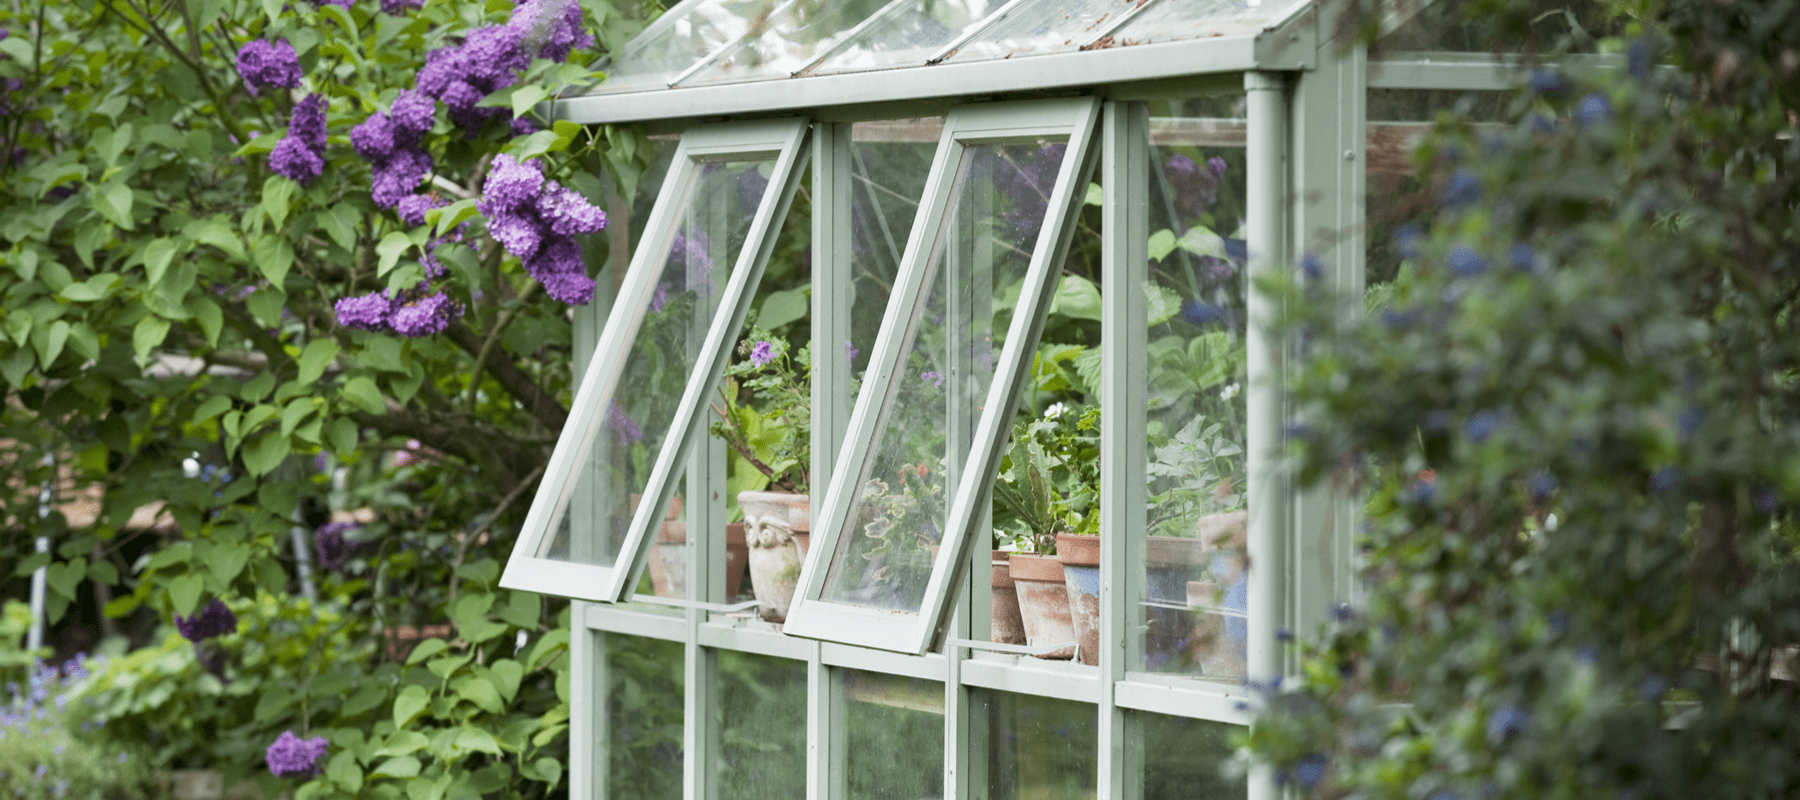 A greenhouse being ventilated